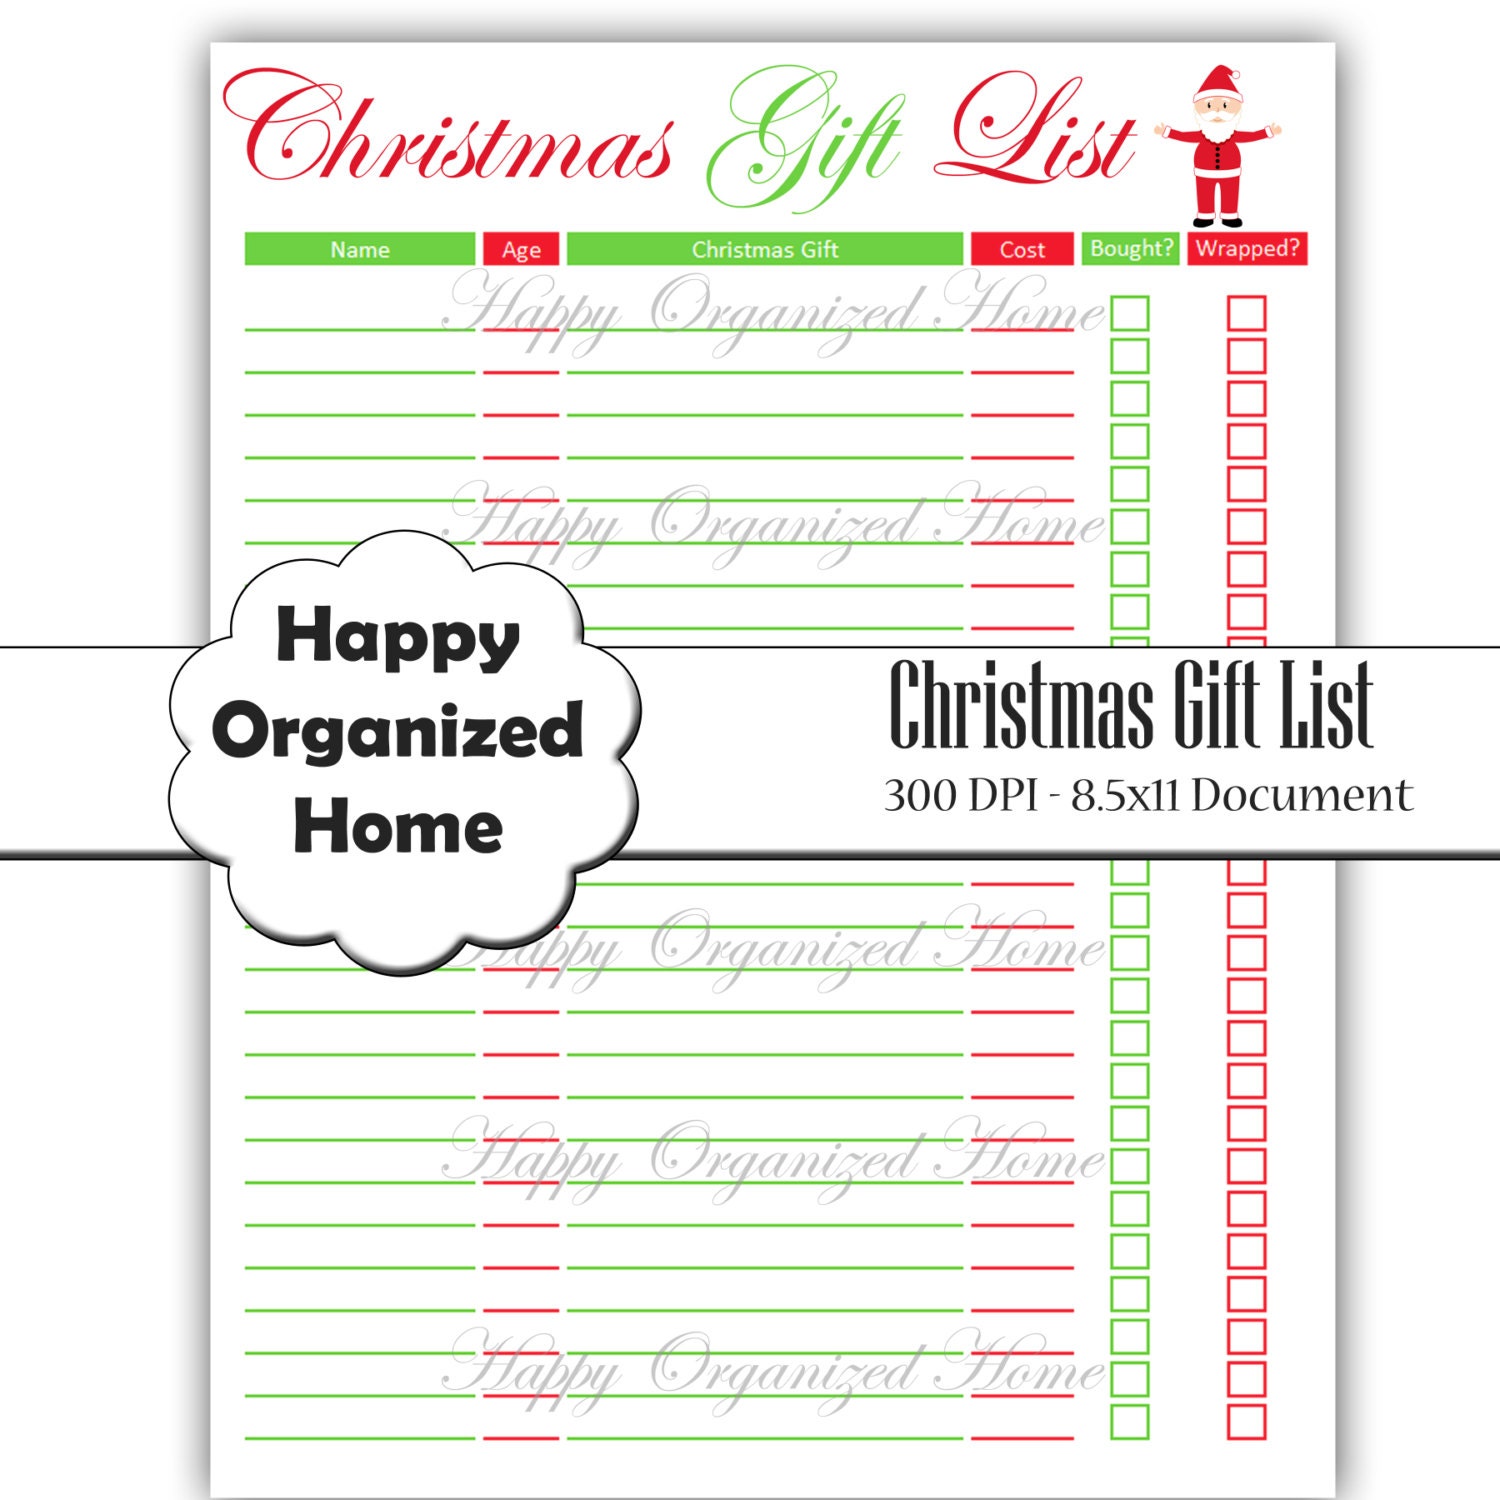 Christmas gift planner printable PDF by on Etsy